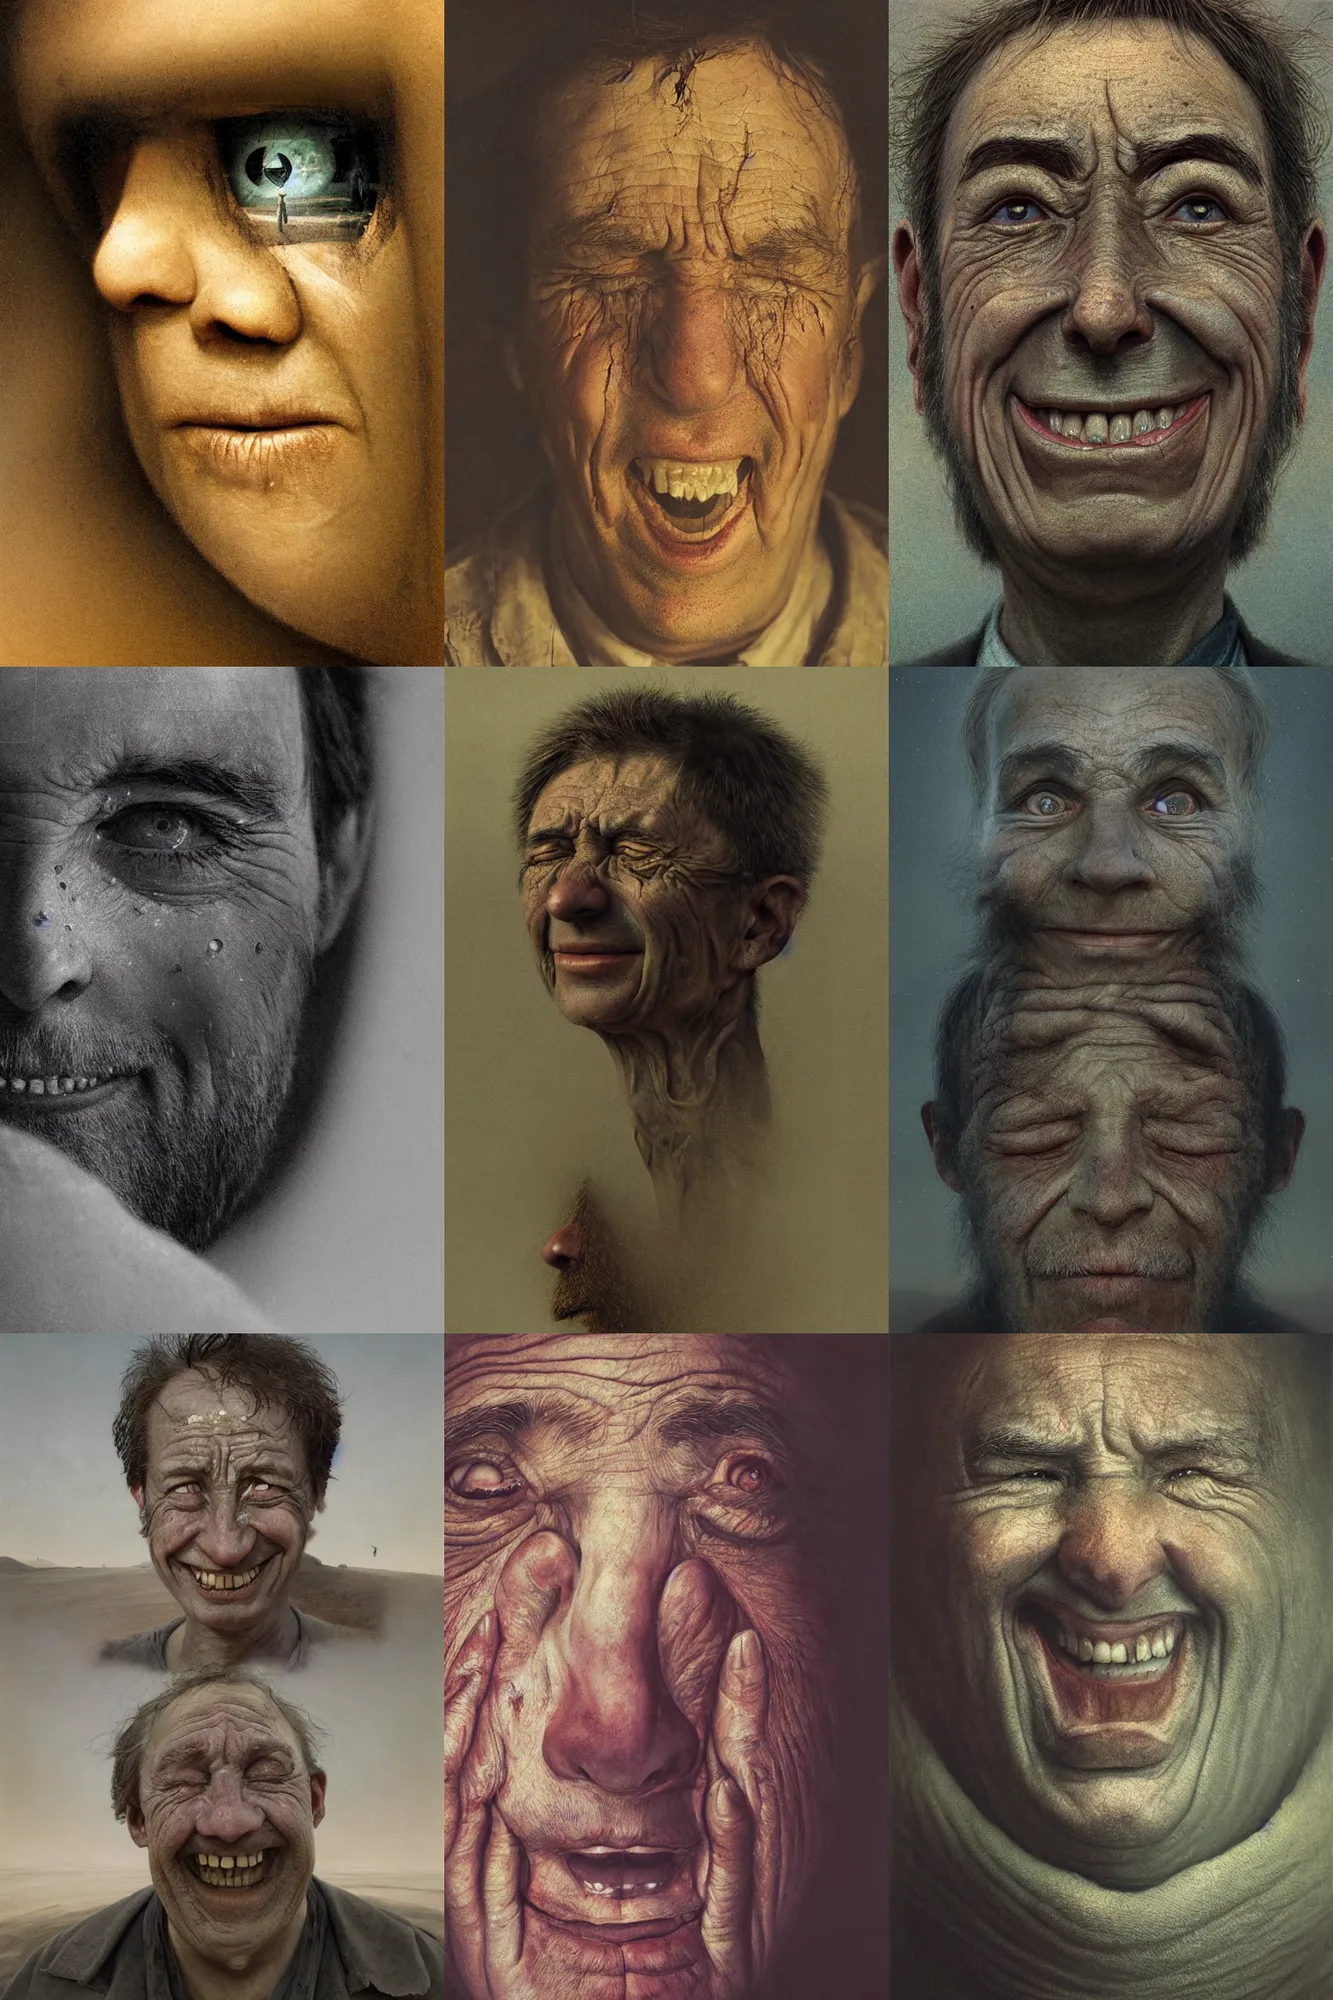 Image similar to close-up face portrait of a human crying and smiling, Les Edwards, Zdzislaw Beksinski, Carl Gustav Carus, John Harris, Michal Karcz, Zhang Kechun, Mikko Lagerstedt, Scott Listfield, Steven Outram, Jessica Rossier